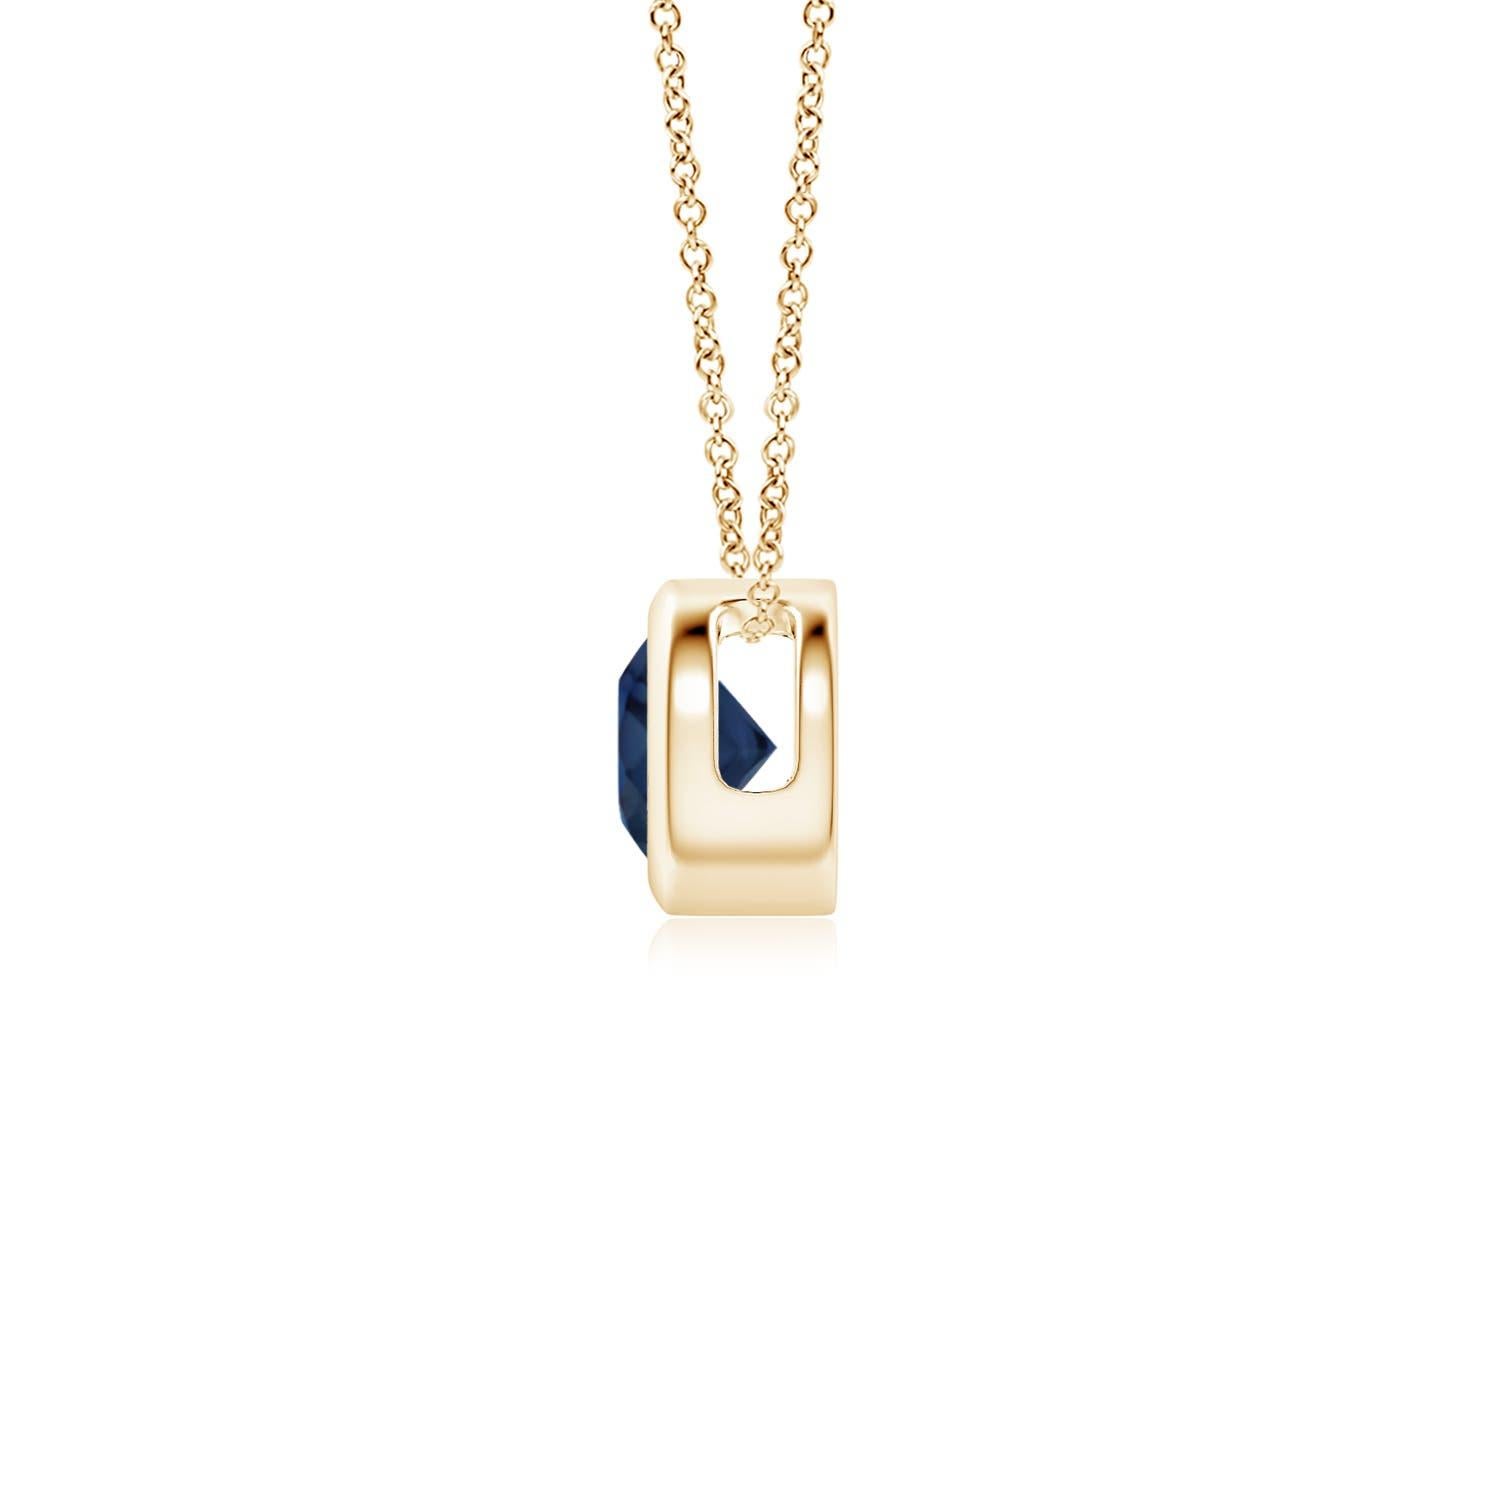 This classic solitaire sapphire pendant's beautiful design makes the center stone appear like it's floating on the chain. The radiant blue gem is secured in a bezel setting. Crafted in 14k yellow gold, this round sapphire pendant is simple yet